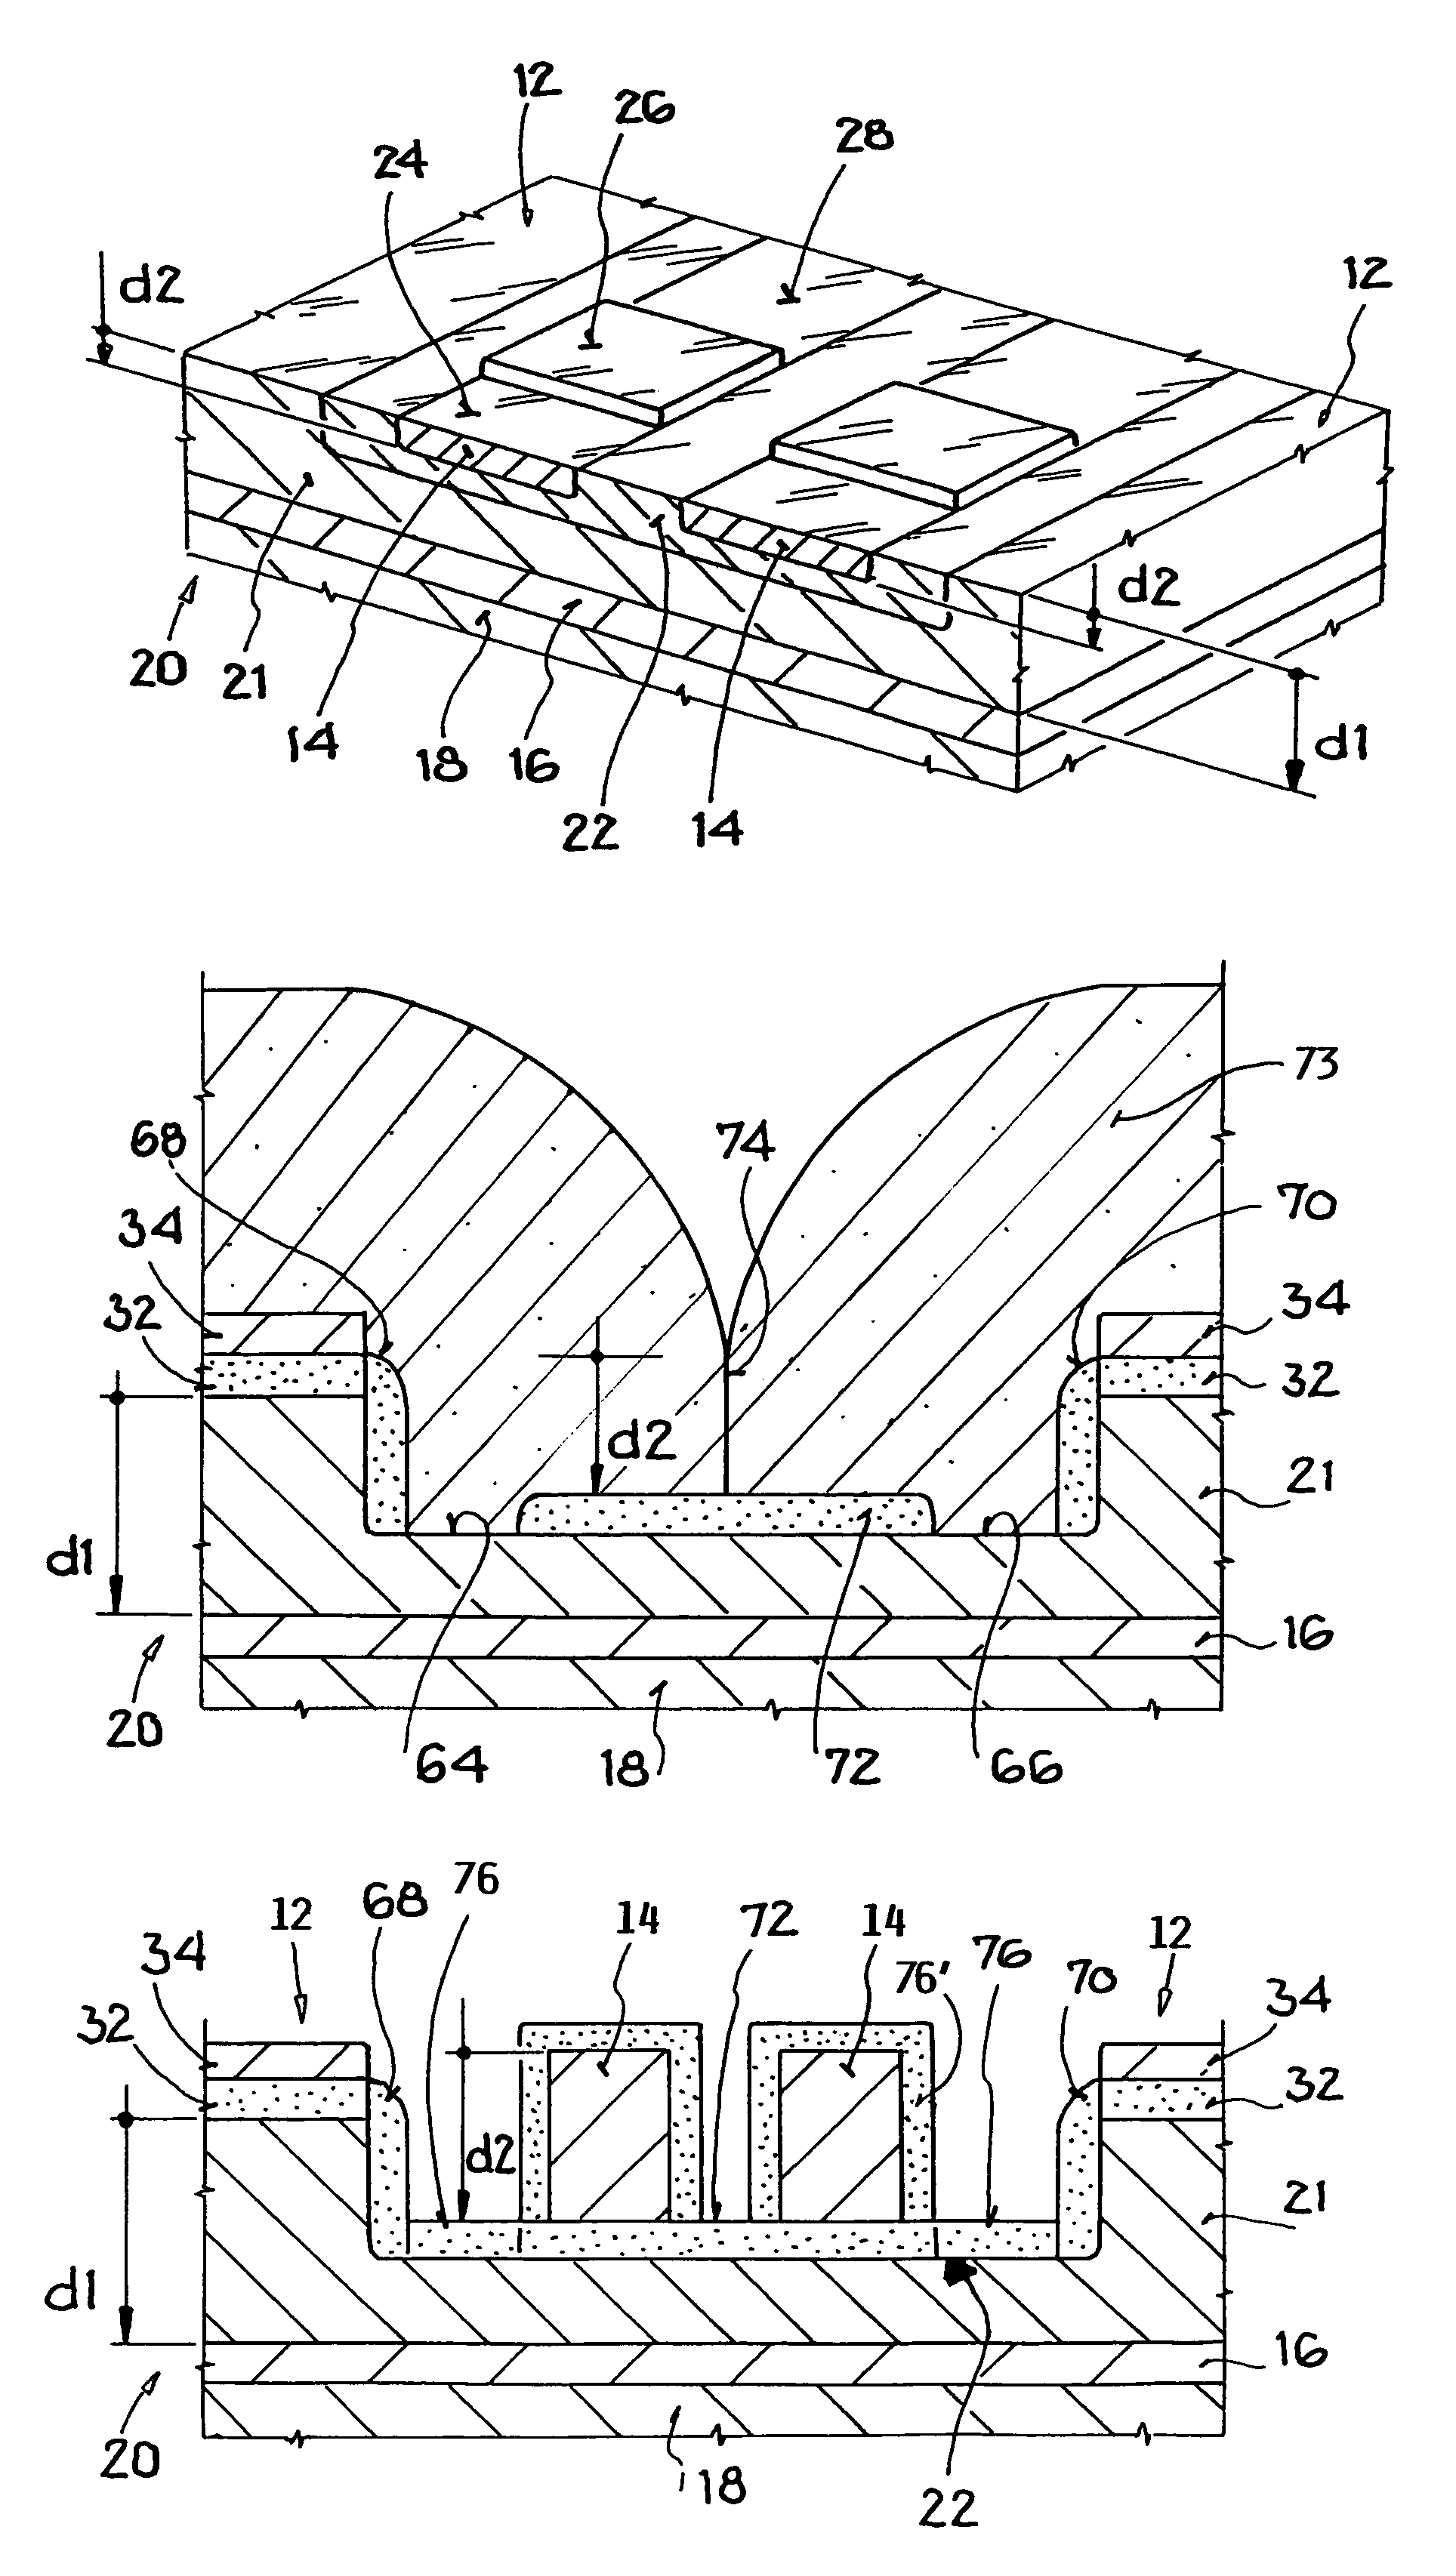 Method of producing active semiconductor layers of different thicknesses in an SOI wafer